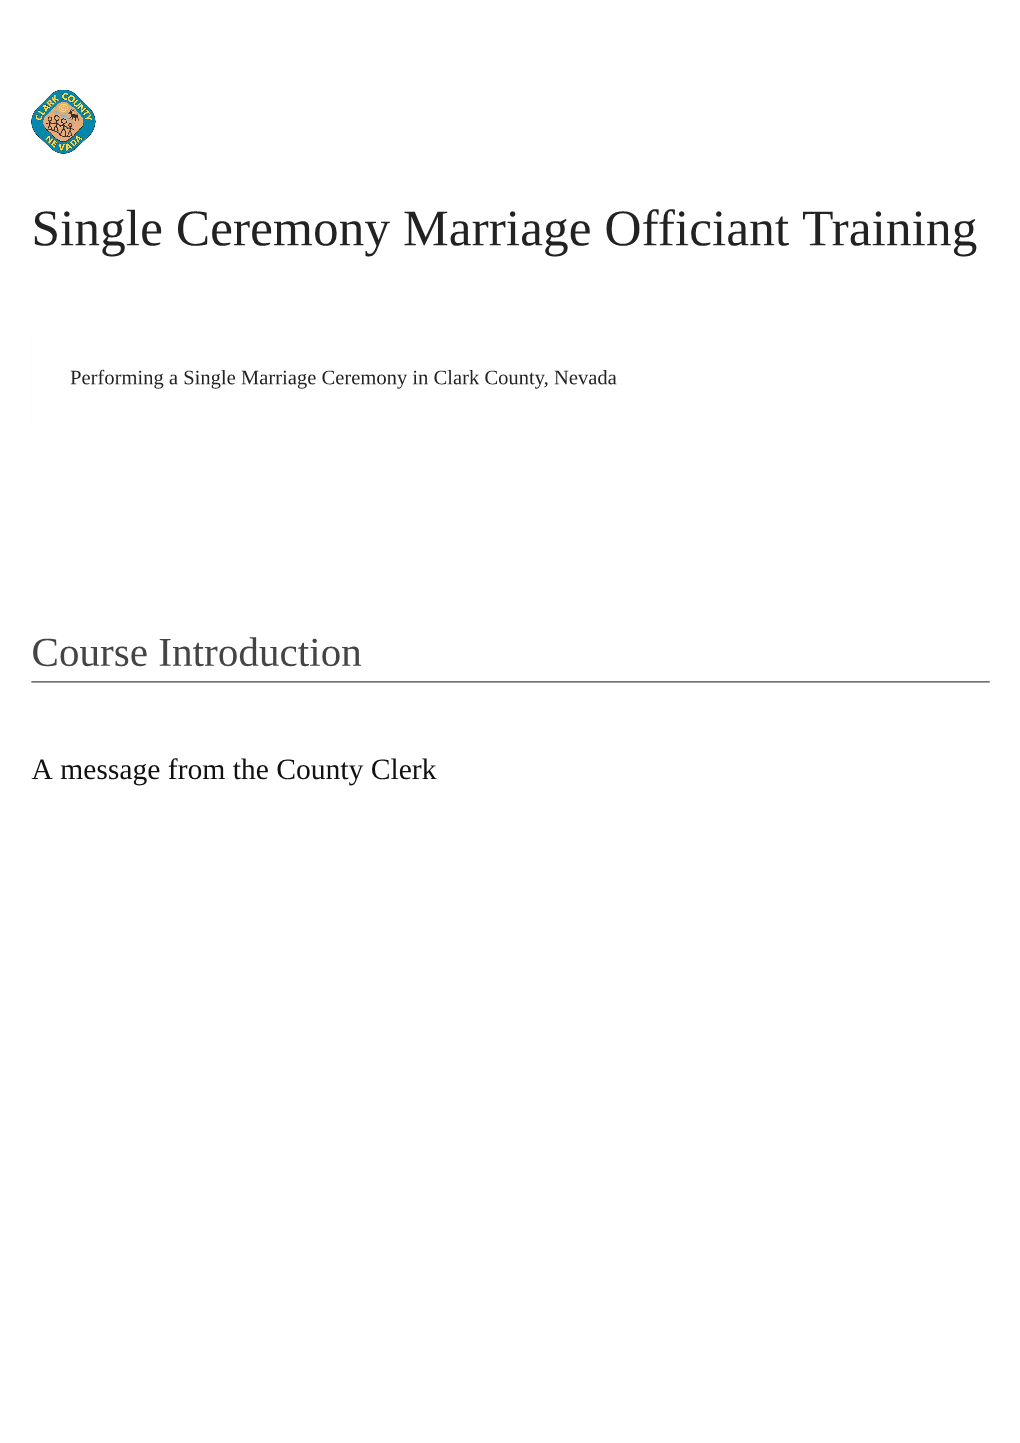 Single Ceremony Marriage Officiant Training